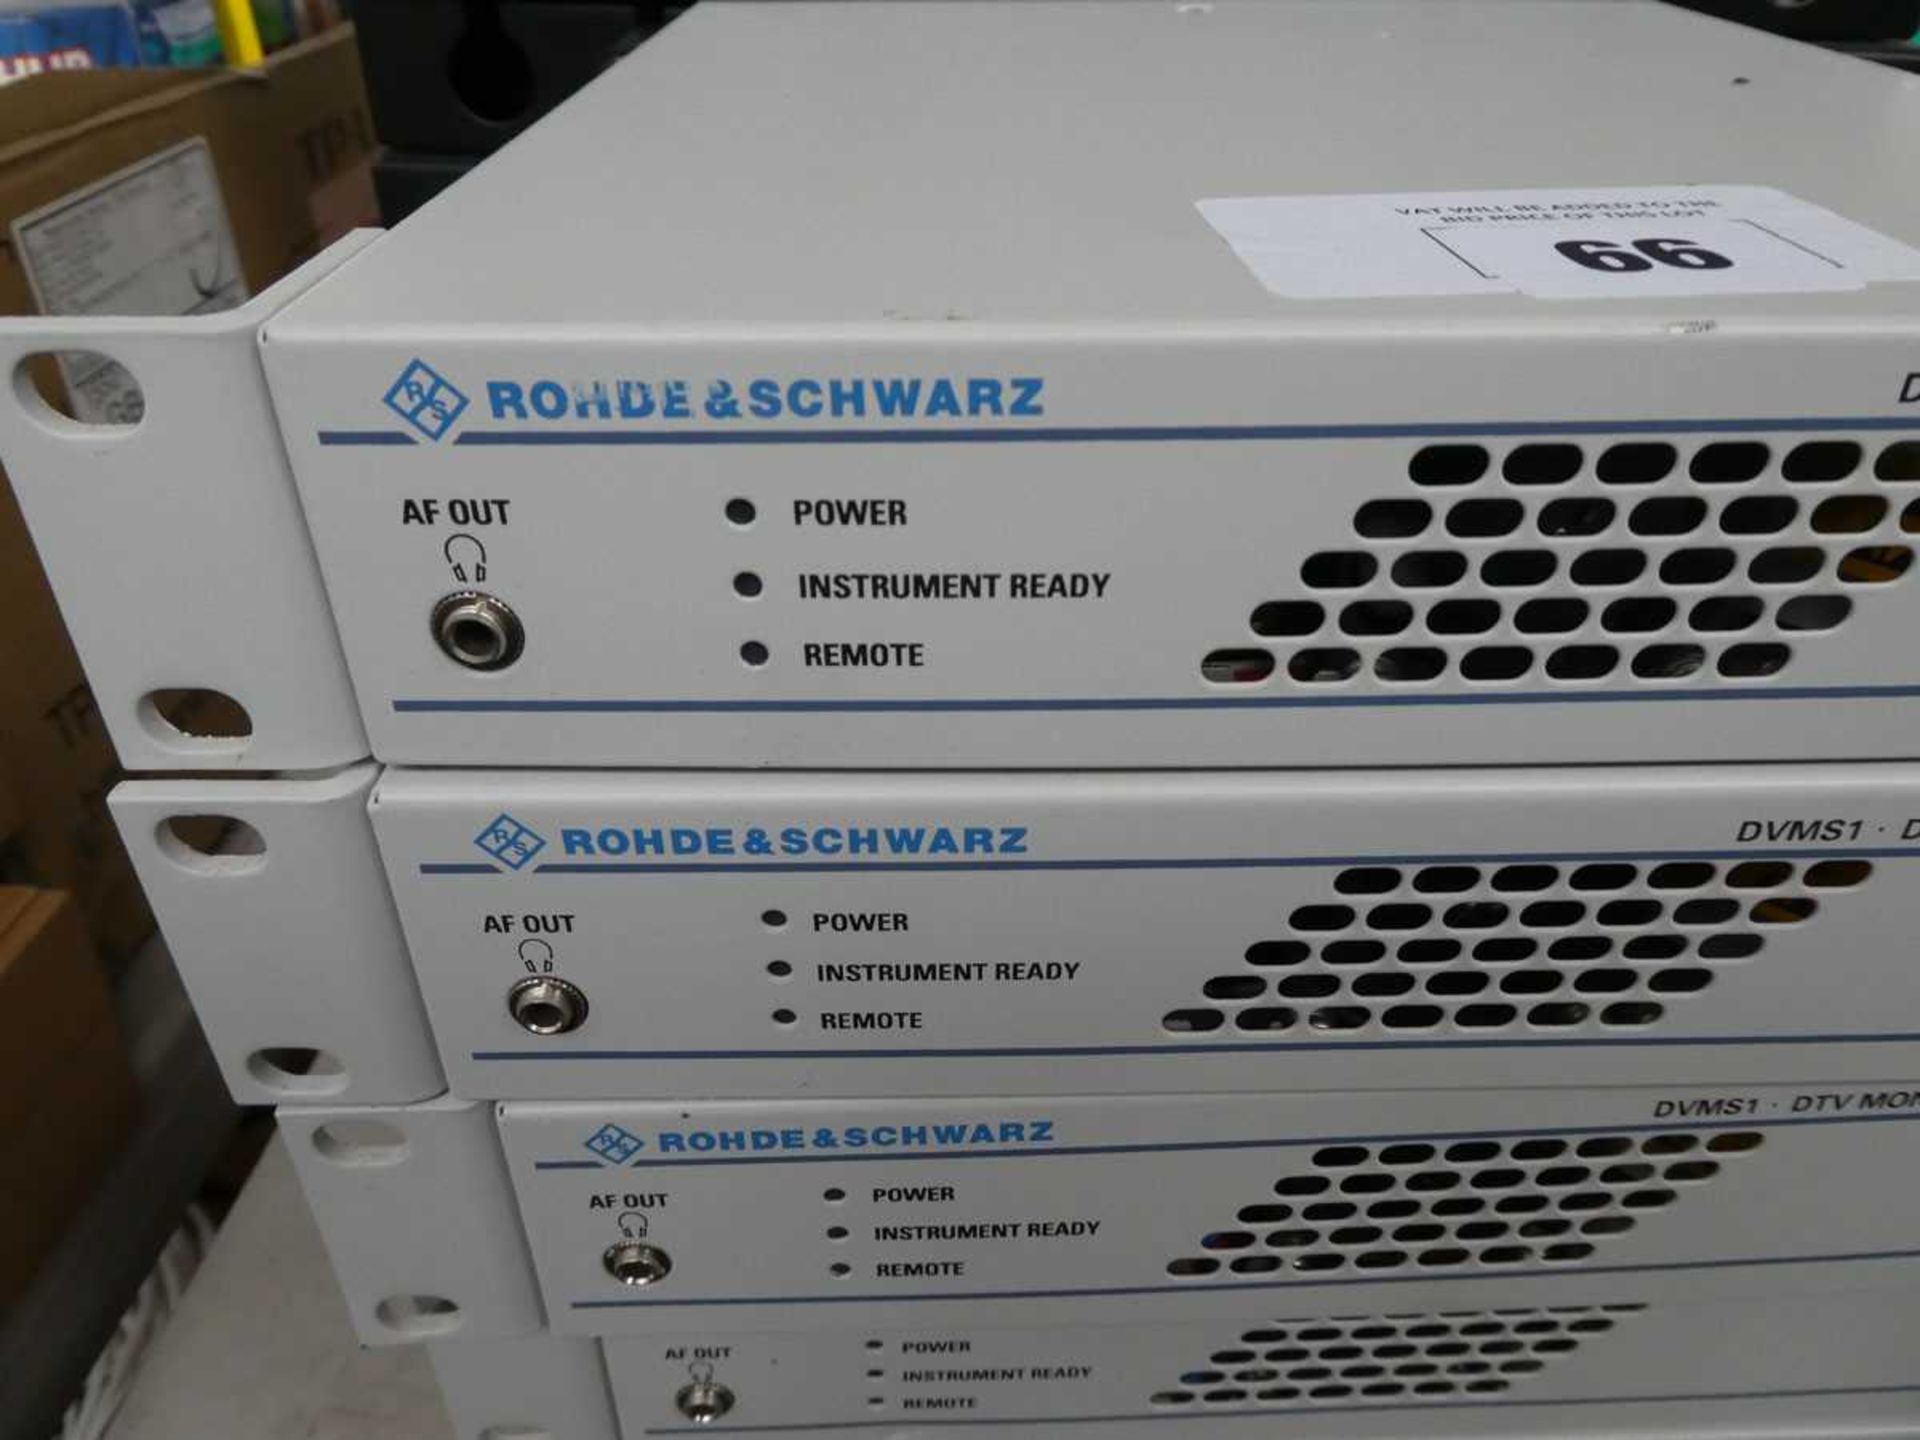 +VAT 6 Rohde & Schwarz DVNS1 DTV monitoring system units for rack mounting with manuals - Image 2 of 3